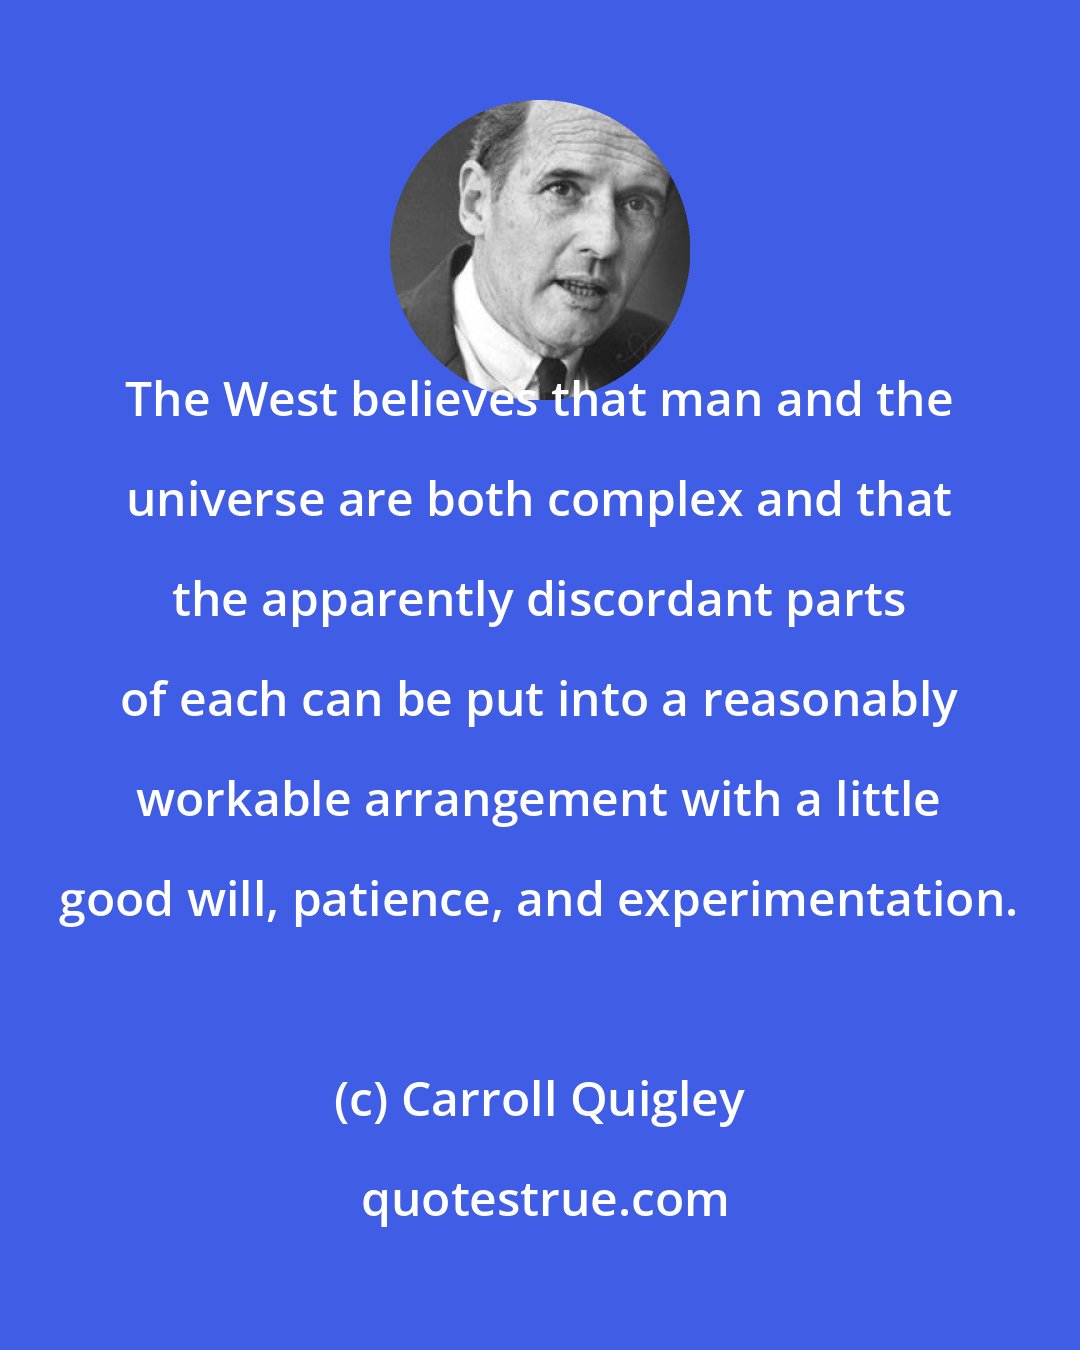 Carroll Quigley: The West believes that man and the universe are both complex and that the apparently discordant parts of each can be put into a reasonably workable arrangement with a little good will, patience, and experimentation.